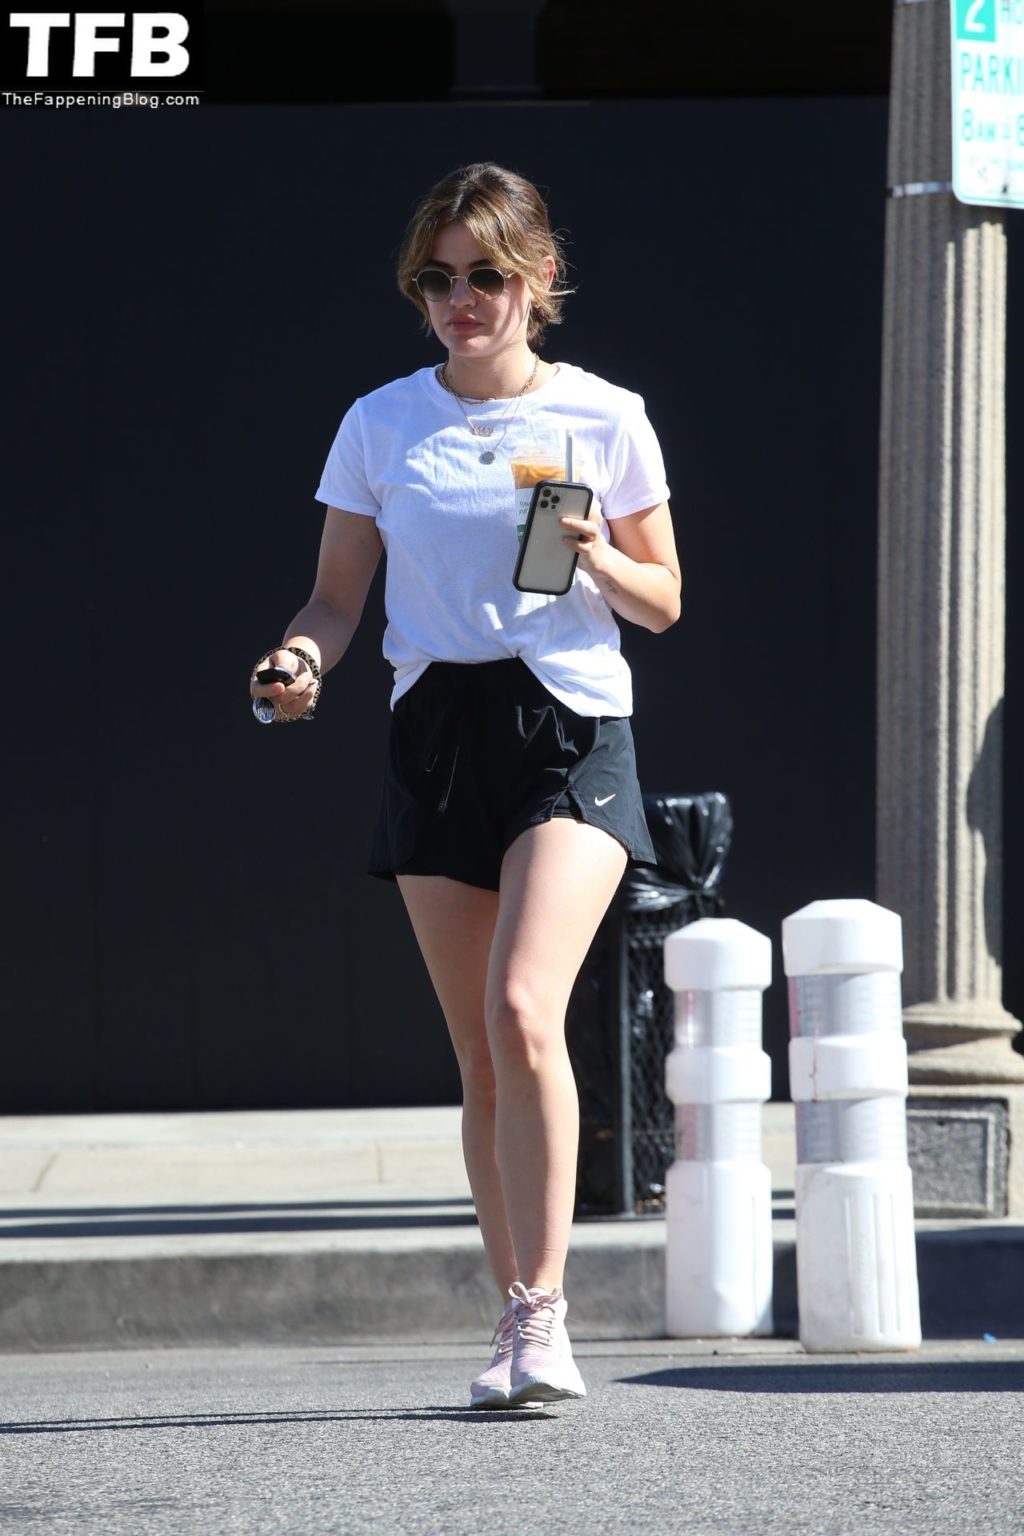 Lucy Hale Sexy The Fappening Blog 4 1 1024x1536 - Leggy Lucy Hale Gets Her Morning Coffee Fix at Alfred’s (14 Photos)